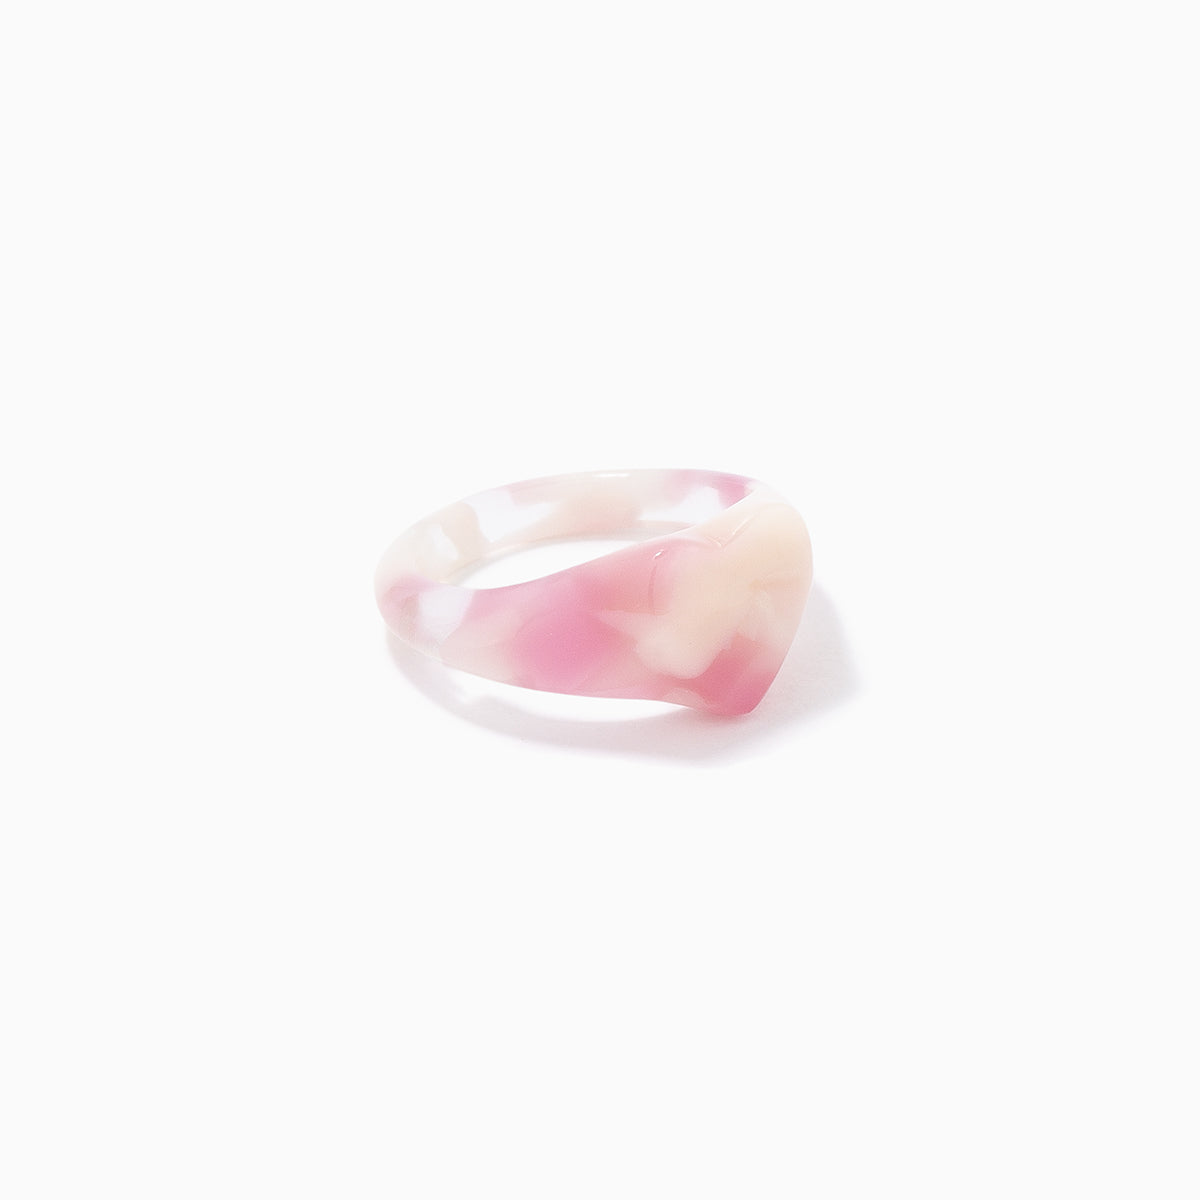 Resin Heart Ring | Resin | Product Detail Image | Uncommon James